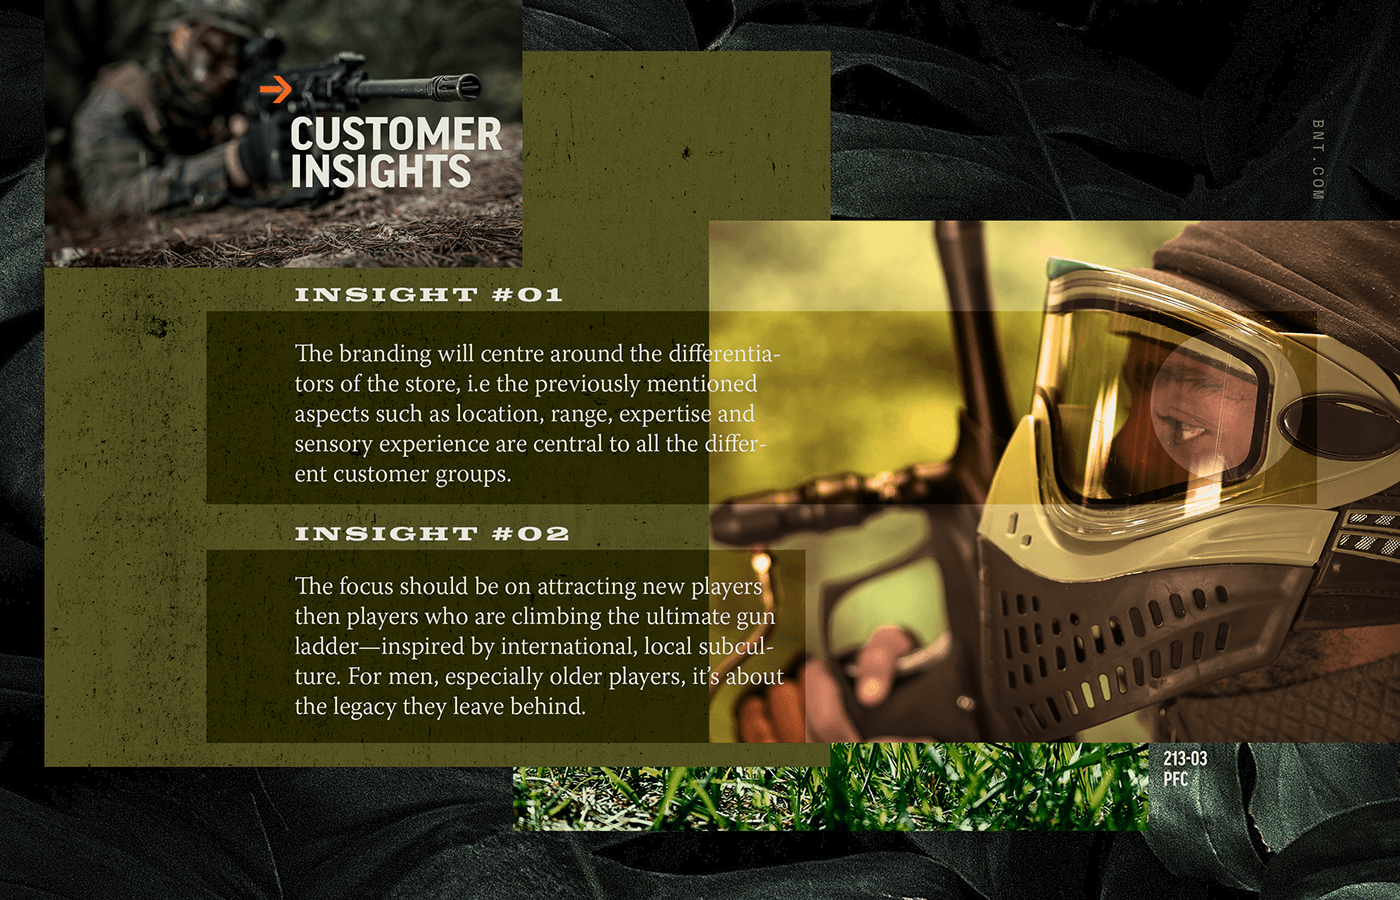 A collage presenting customer insights for gun branding, focusing on location, range, and expertise.